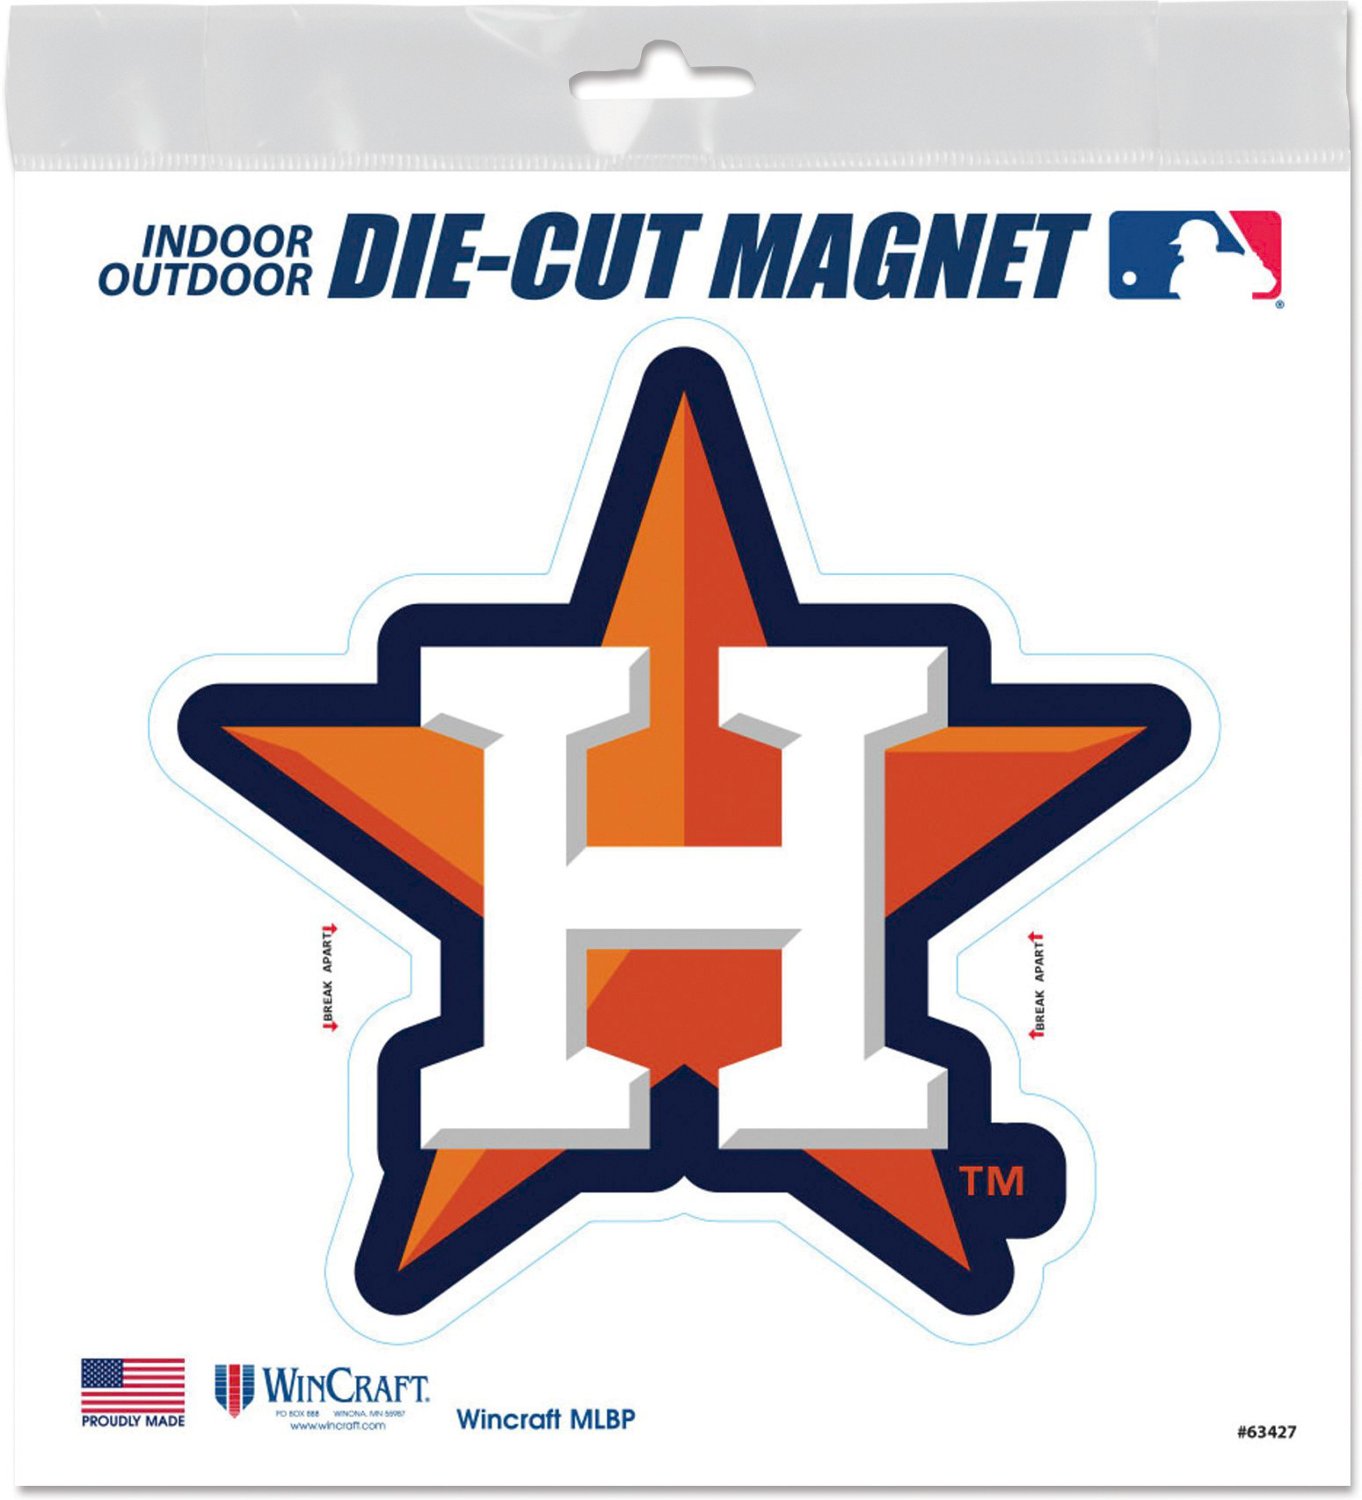 Houston Astros x Academy Sports + Outdoors: Back to School, Back